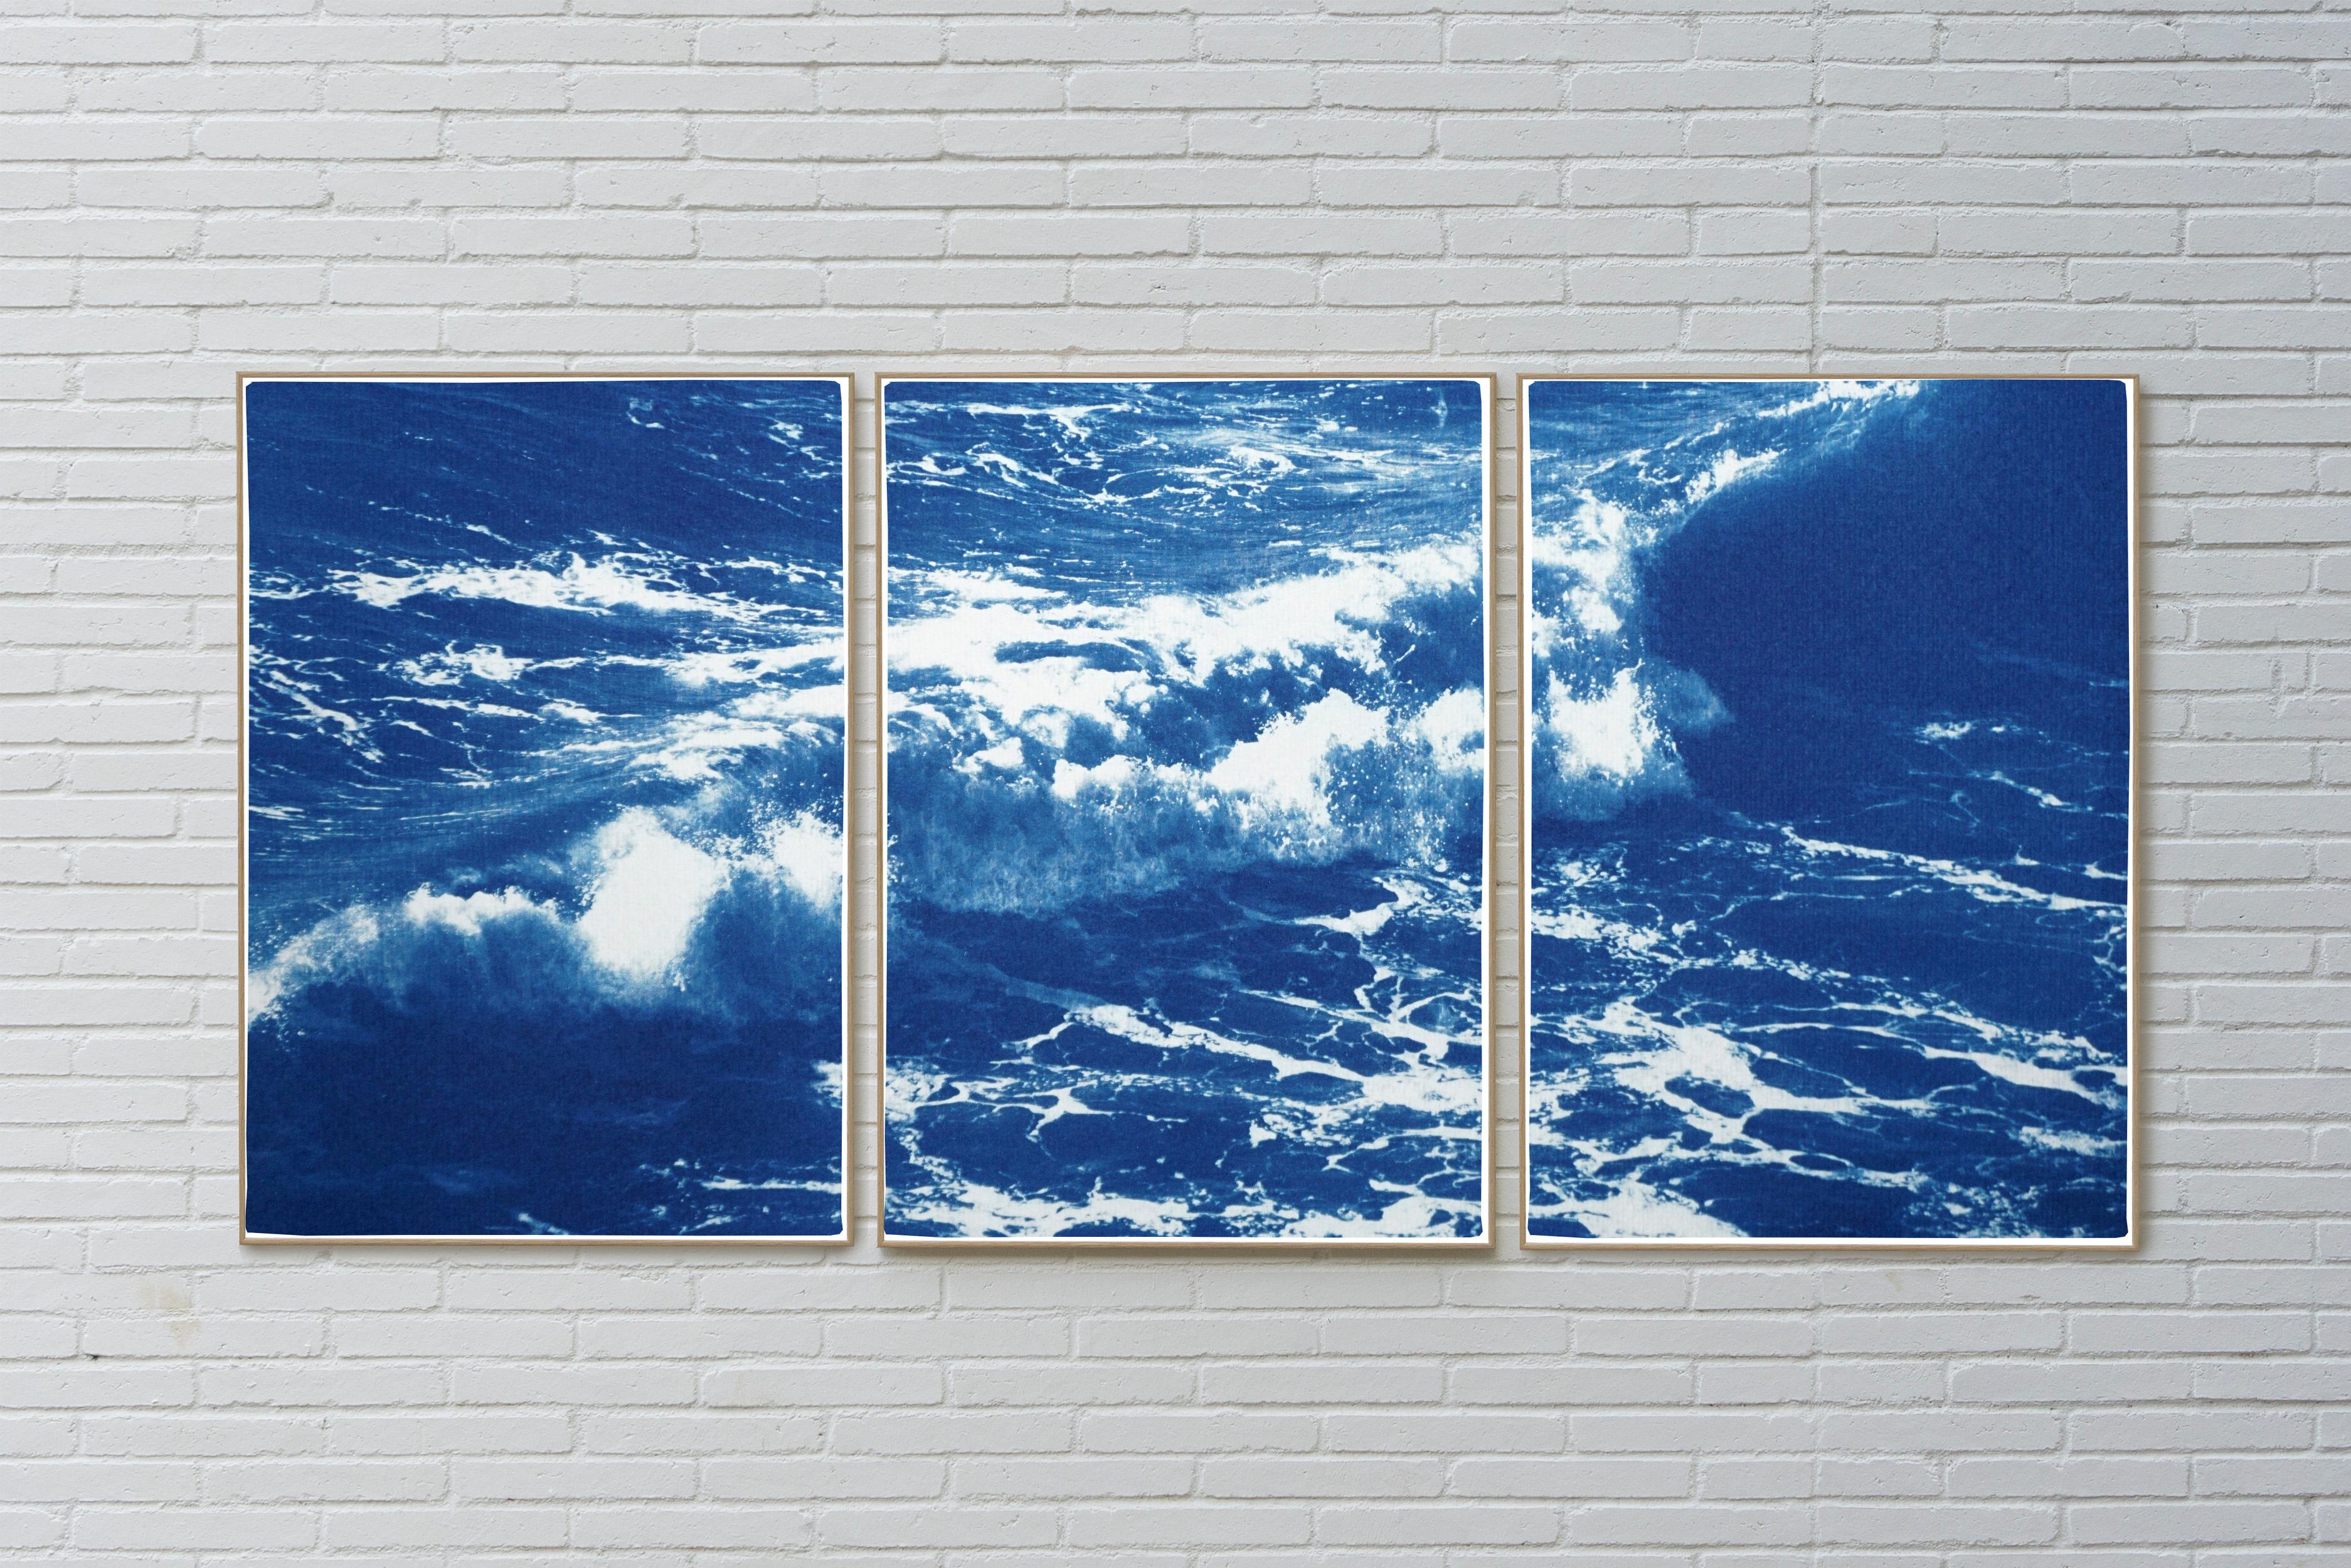 Australian Rolling Waves, Nautical Triptych of Vigorous Coast, Large Seascape - Realist Painting by Kind of Cyan